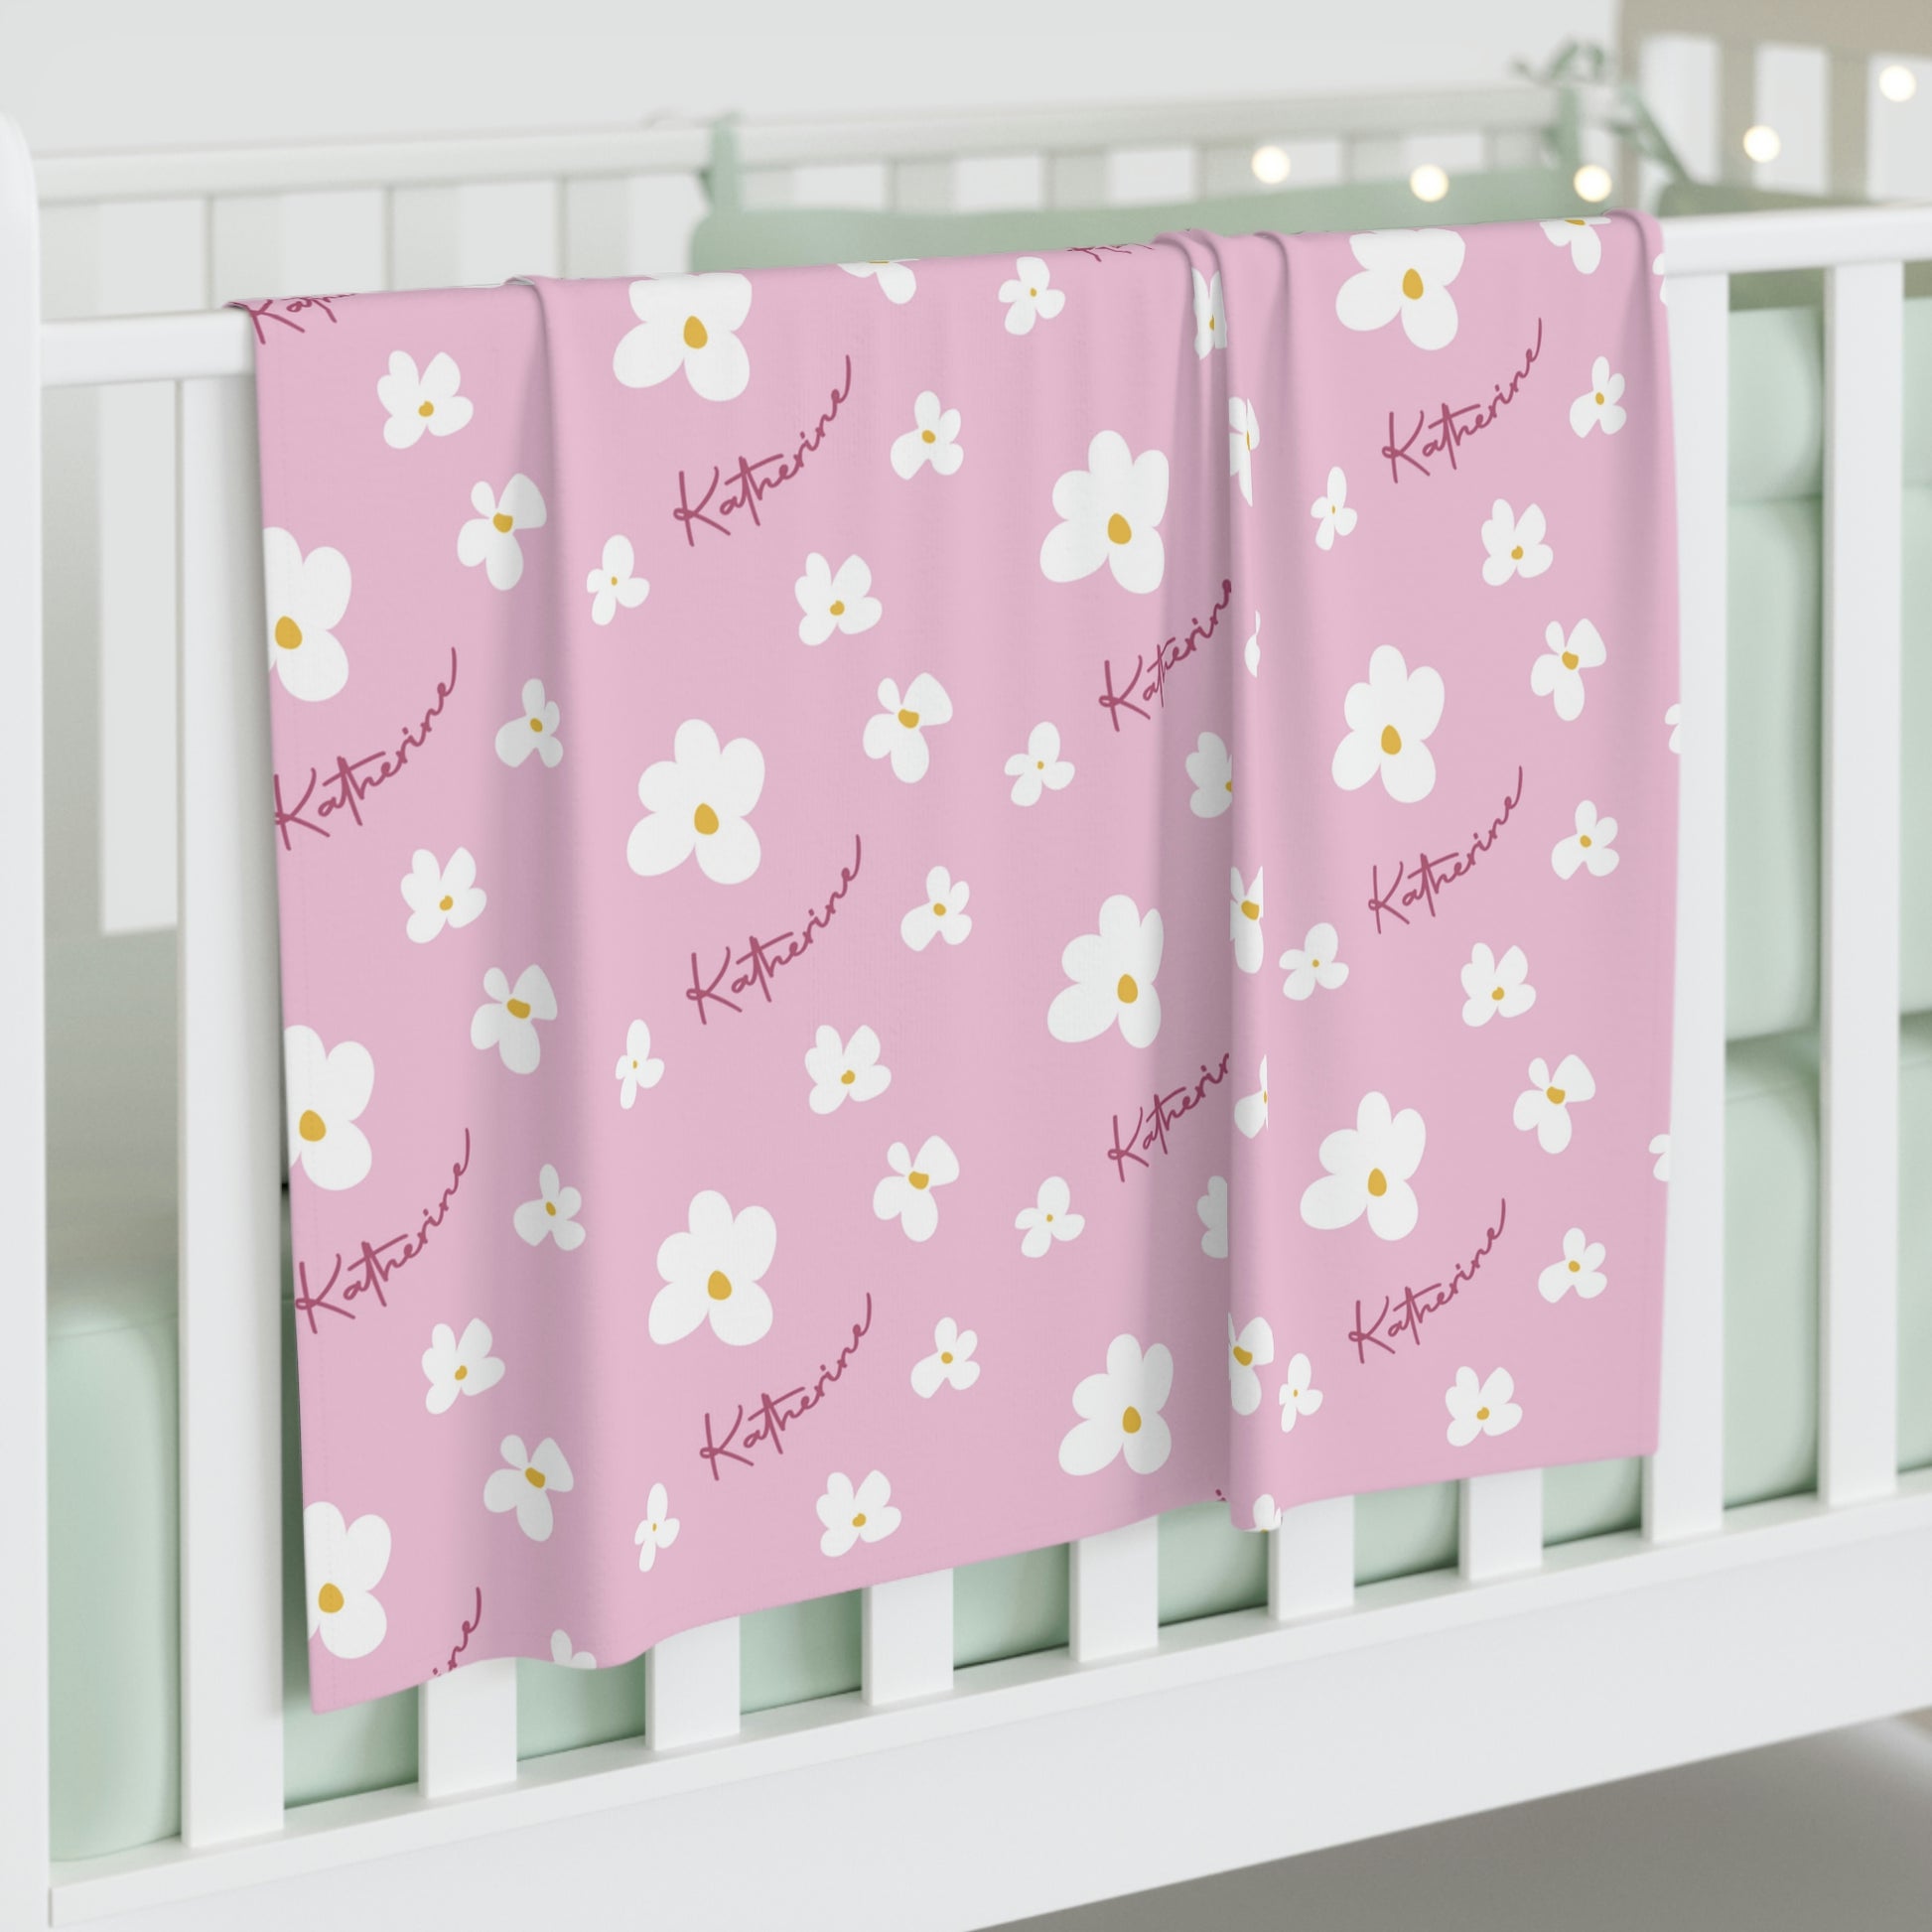 Jersey personalized baby blanket in pink daisy pattern hung over side of white crib